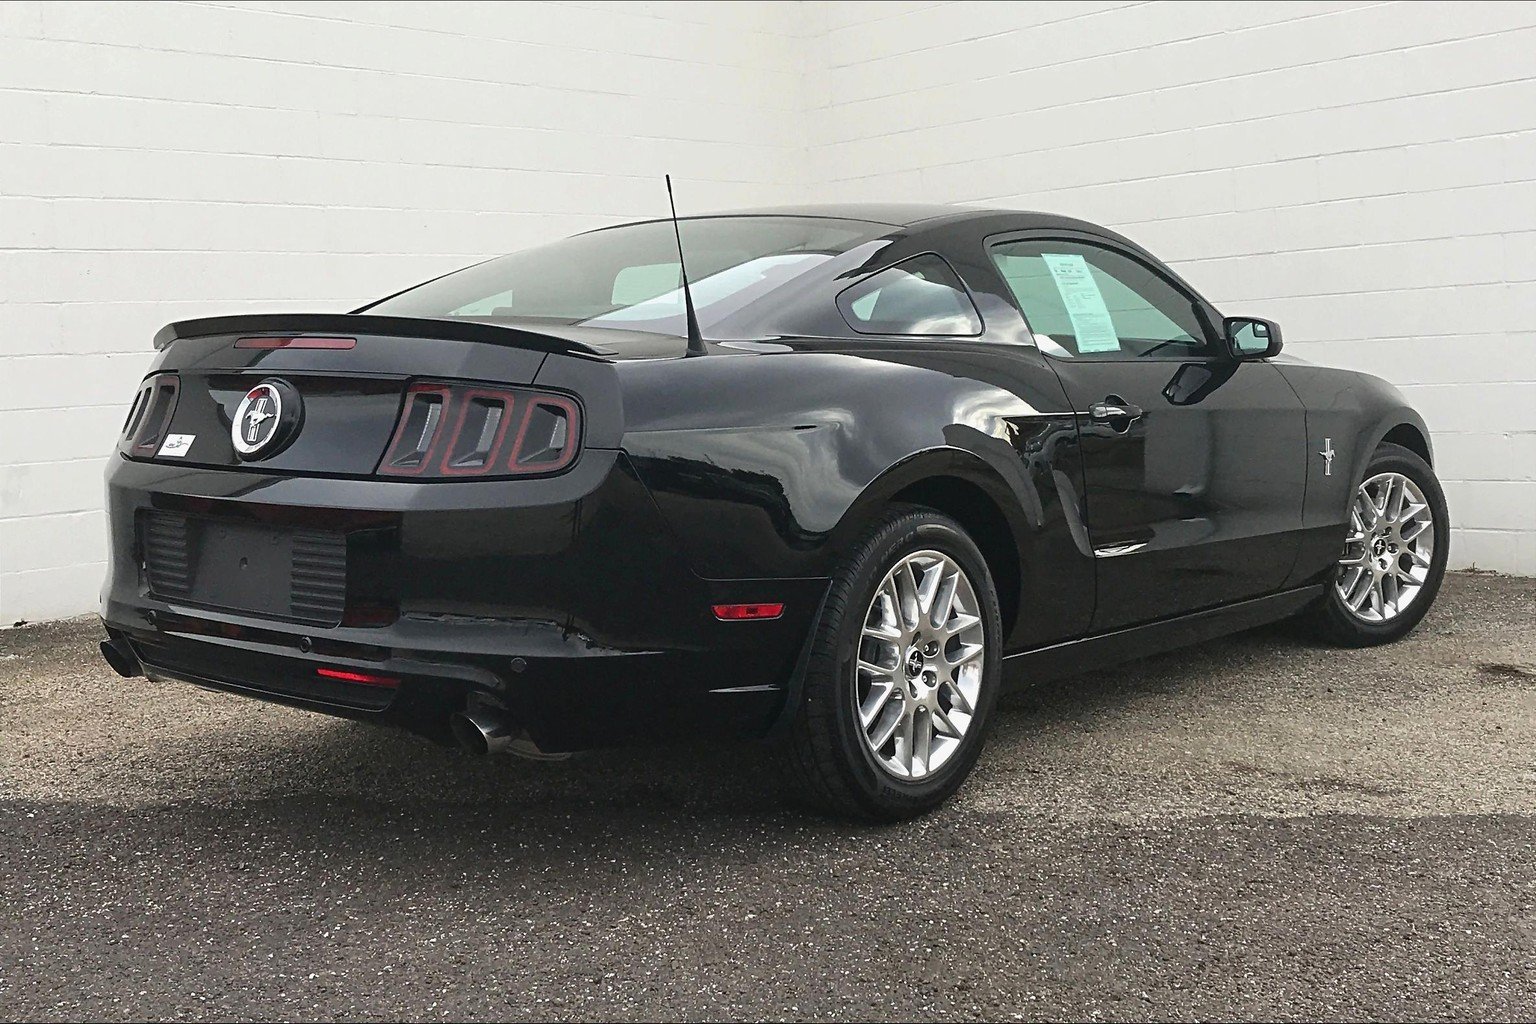 PreOwned 2013 Ford Mustang V6 Premium 2dr Car in Morton